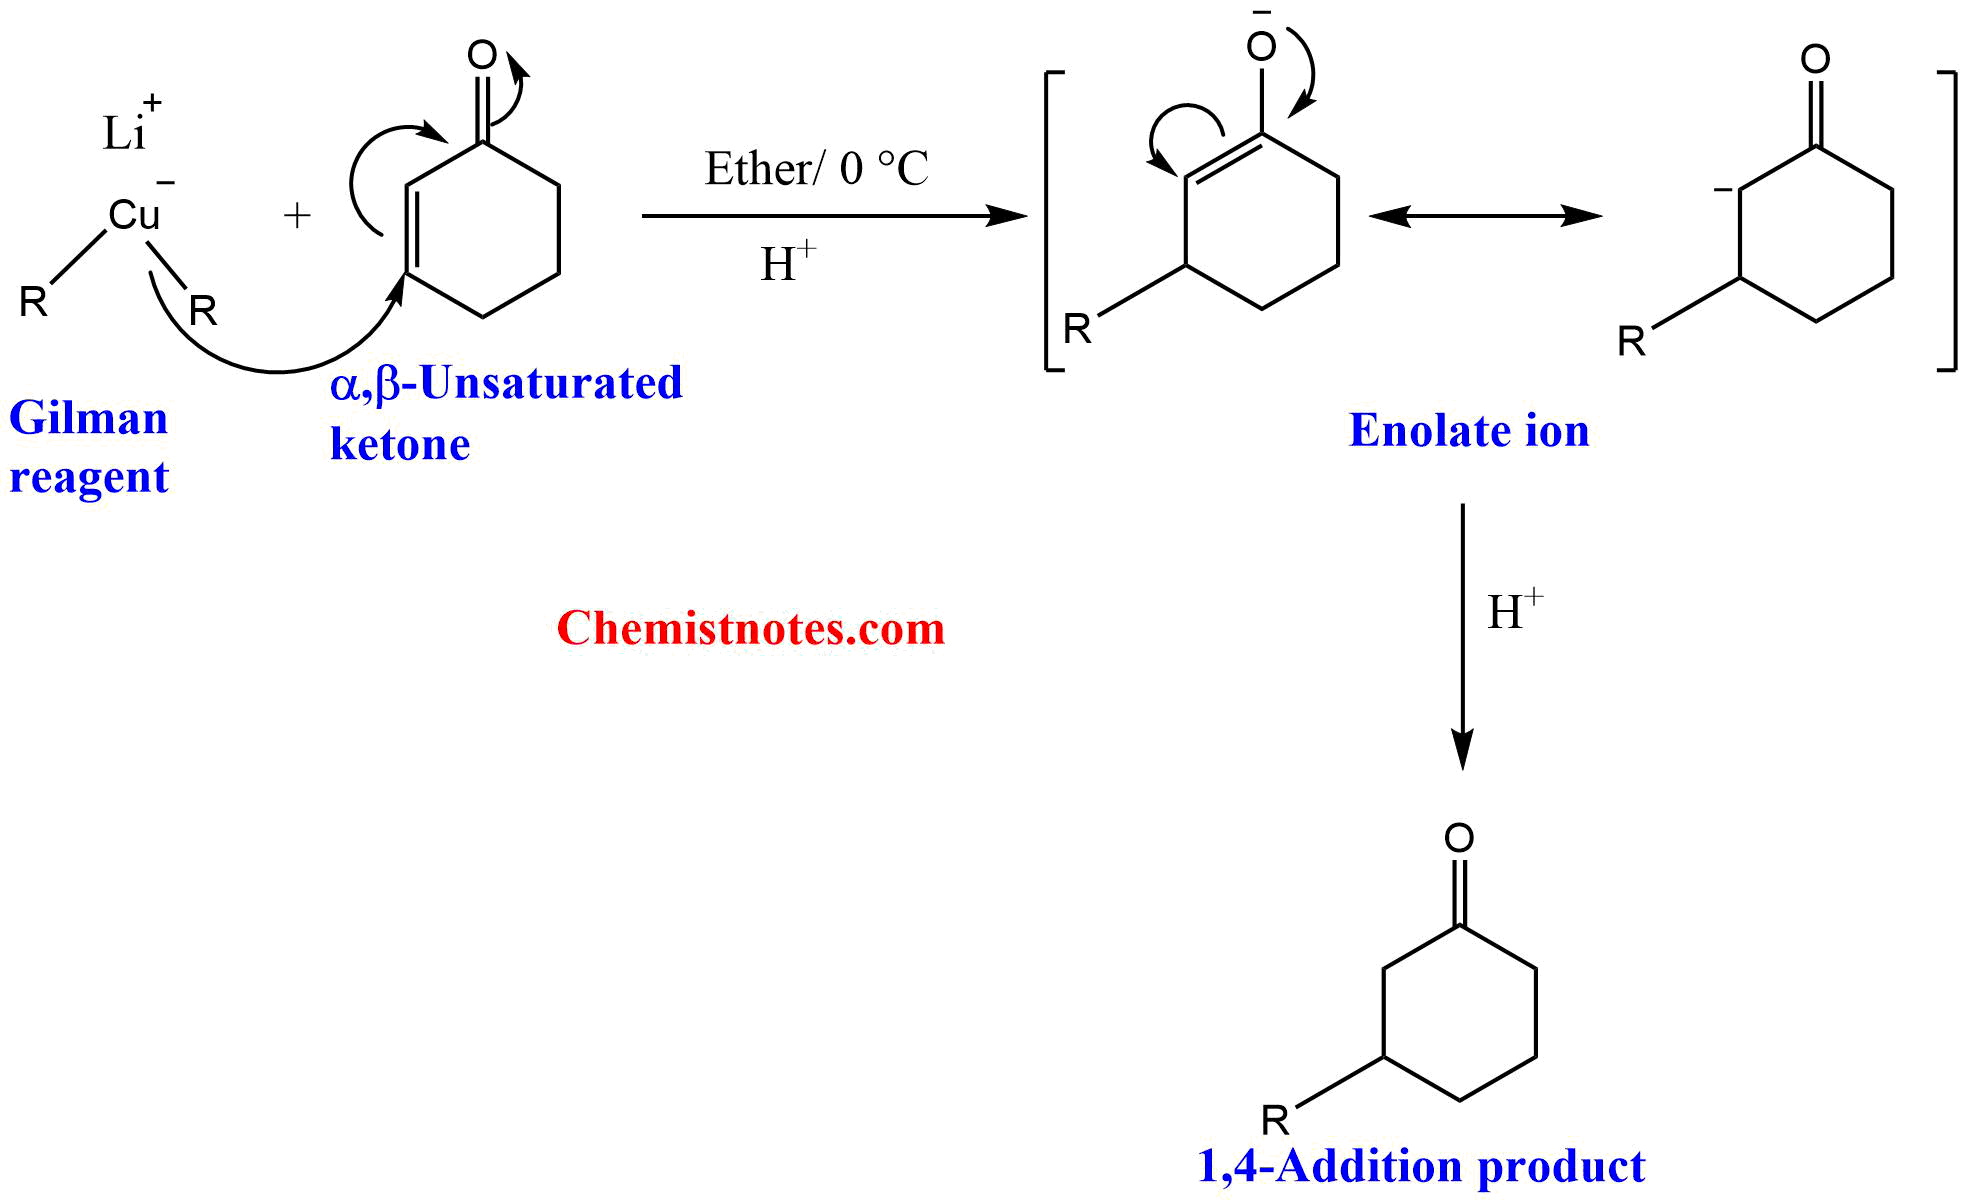 Mechanism of Gilman reagent with α,β-unsaturated ketones